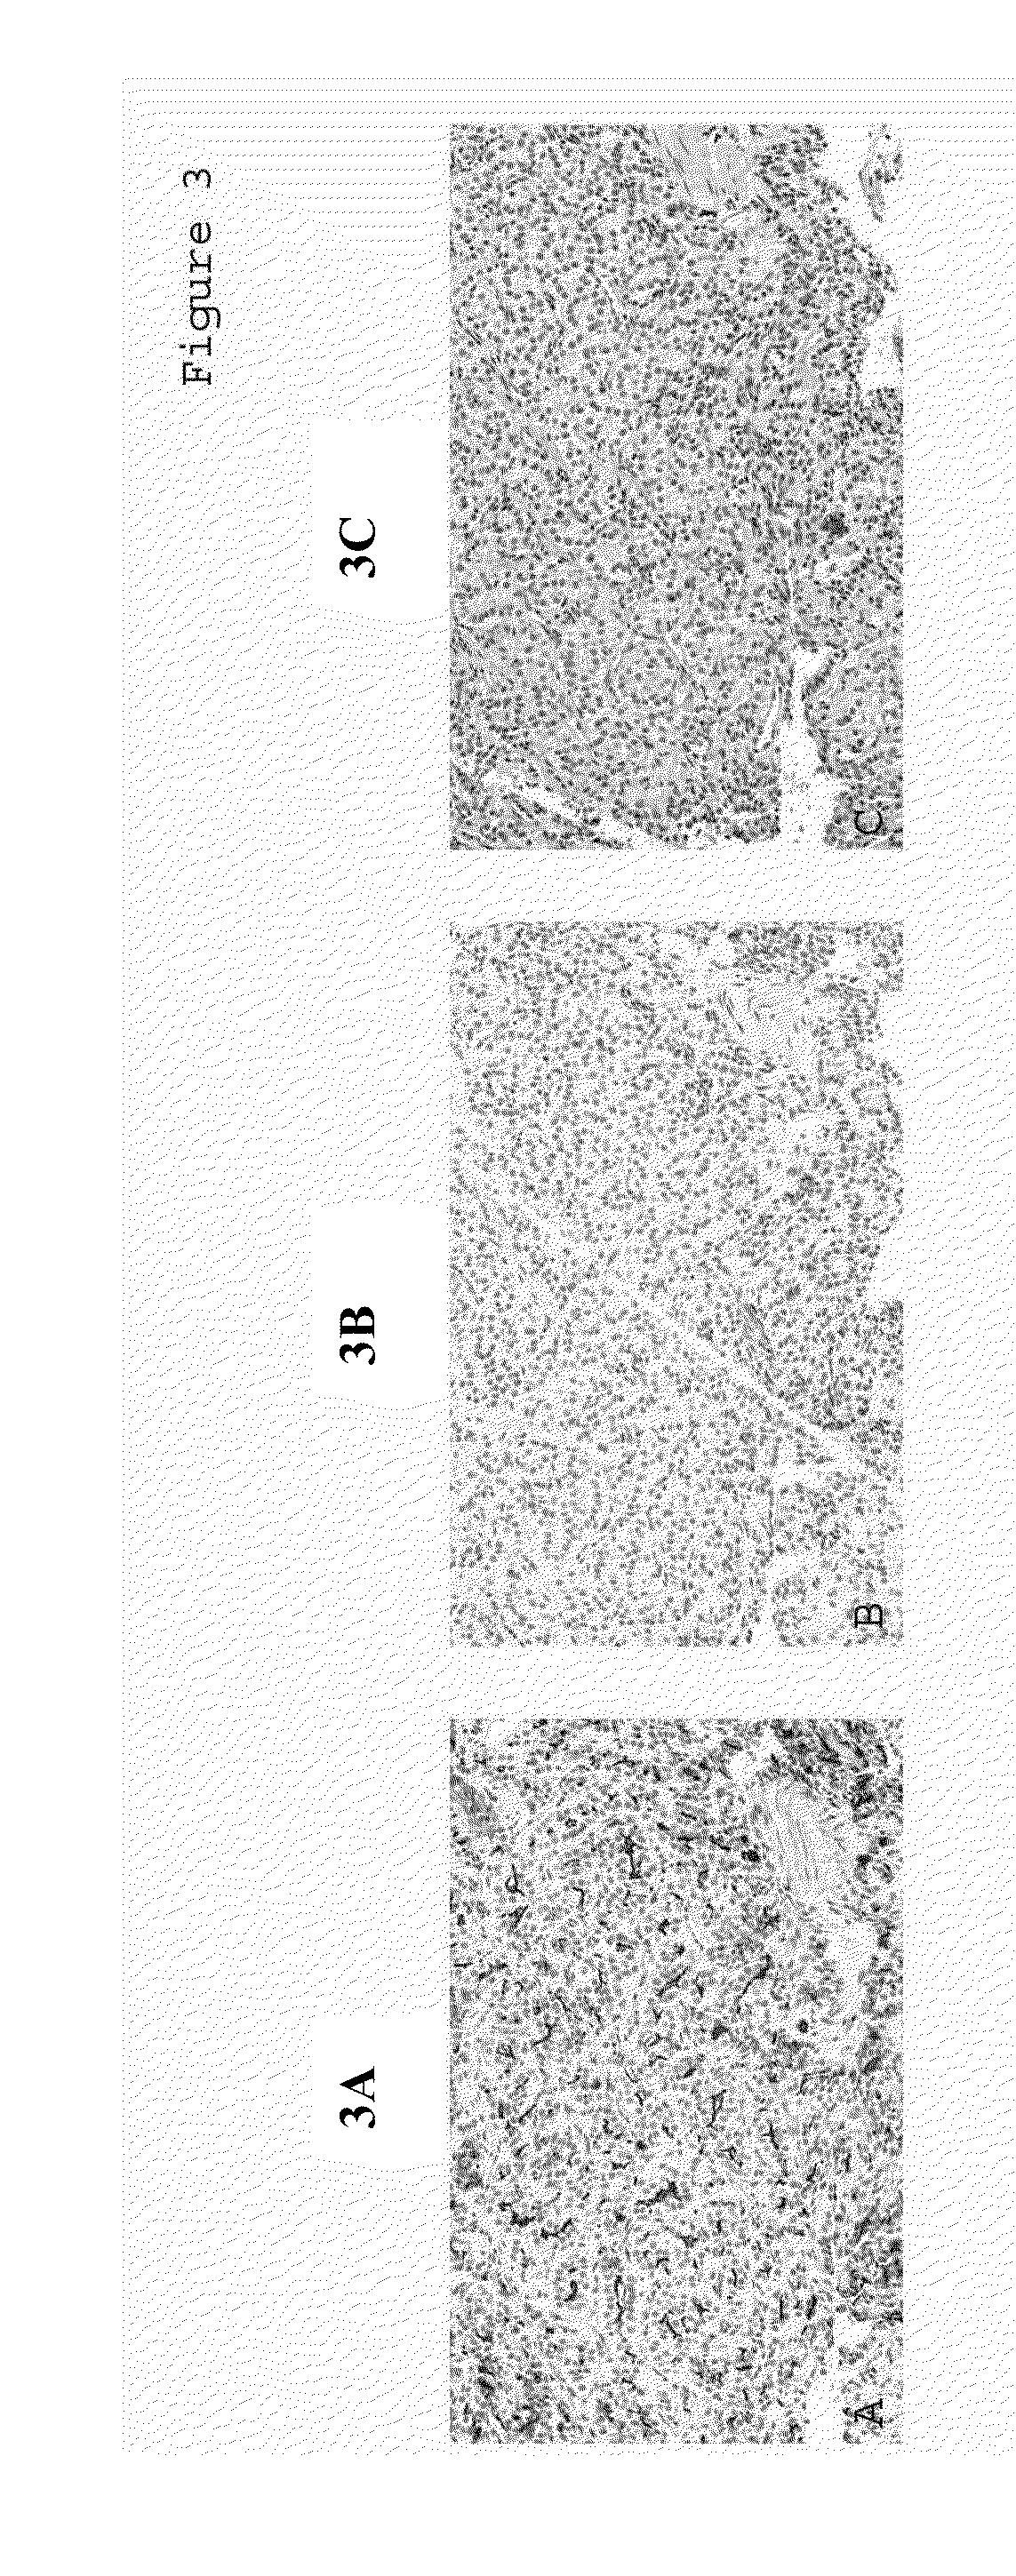 Methods for Detecting Tumor Origin Based on MUC1, MUC2, and CK-17 Expression Levels